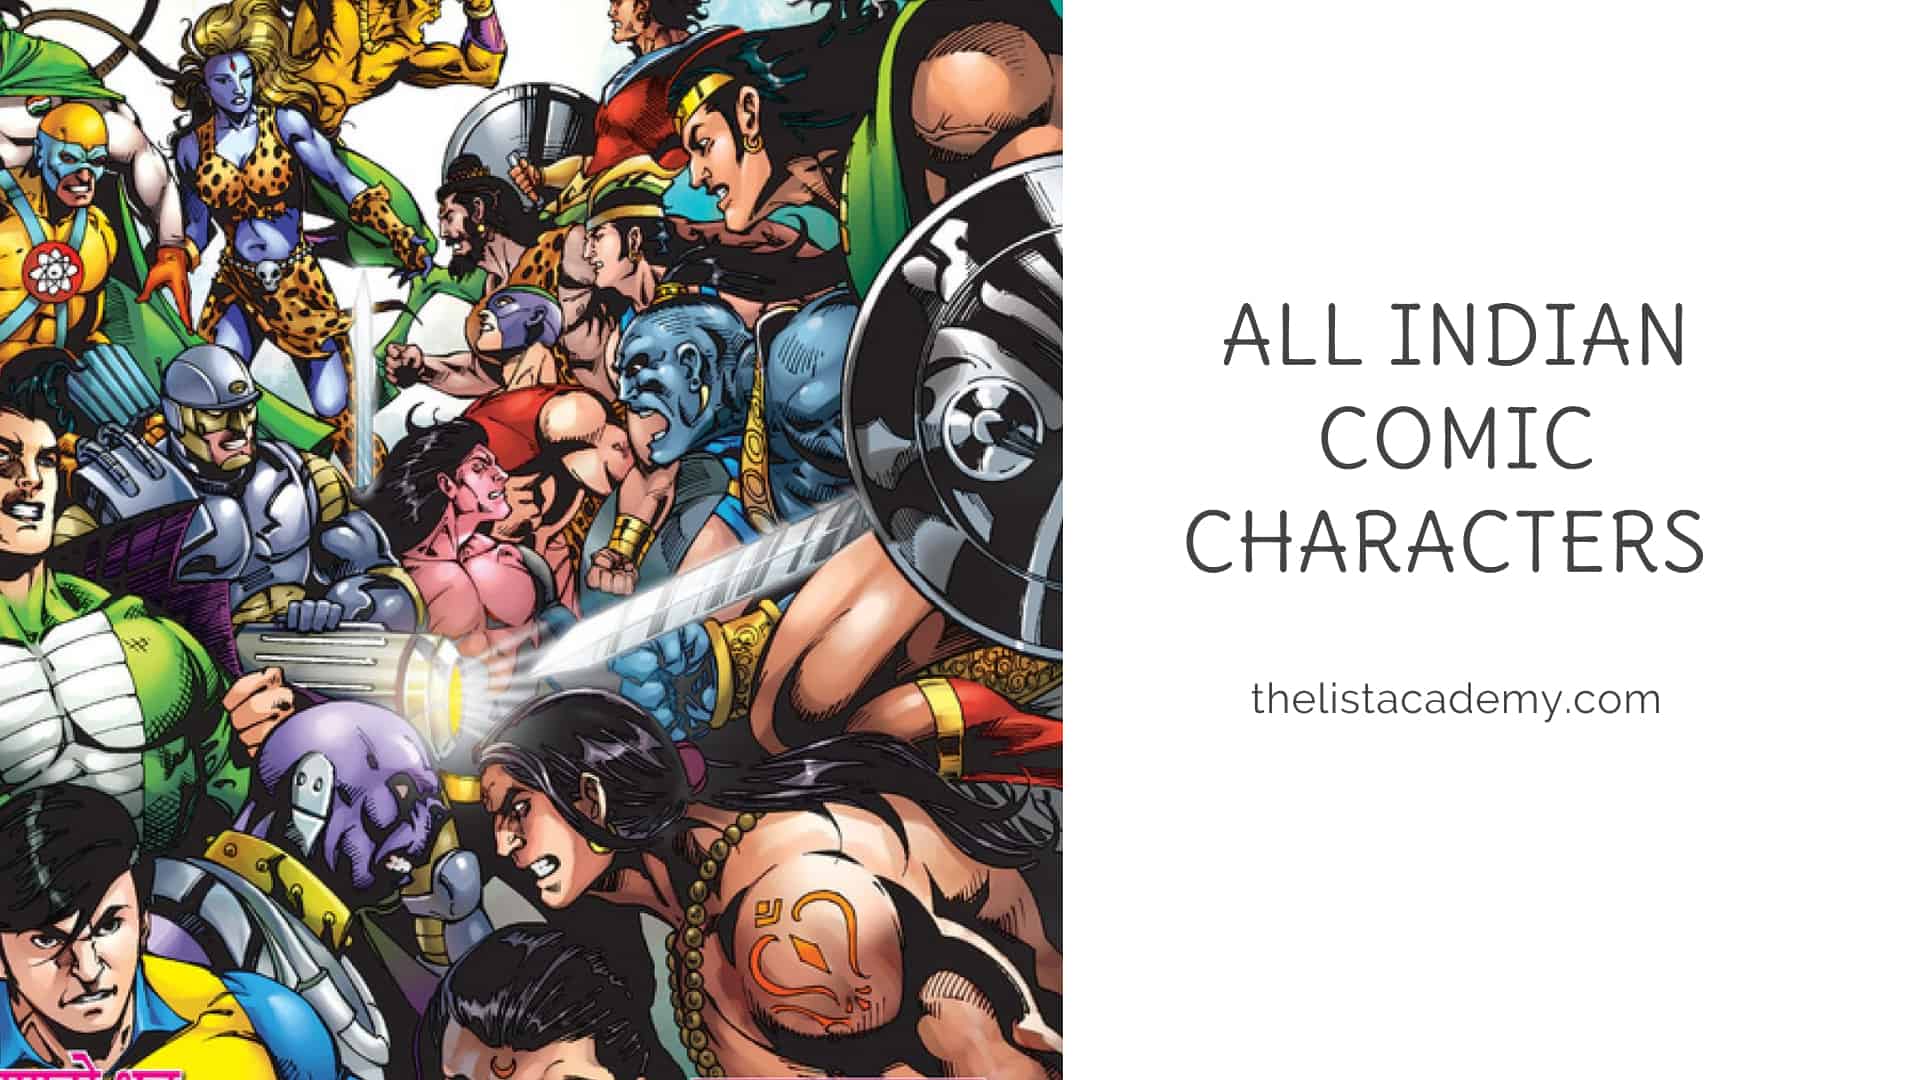 Cover Image For List : All Indian Comic Characters - 300+ Indian Comic Characters